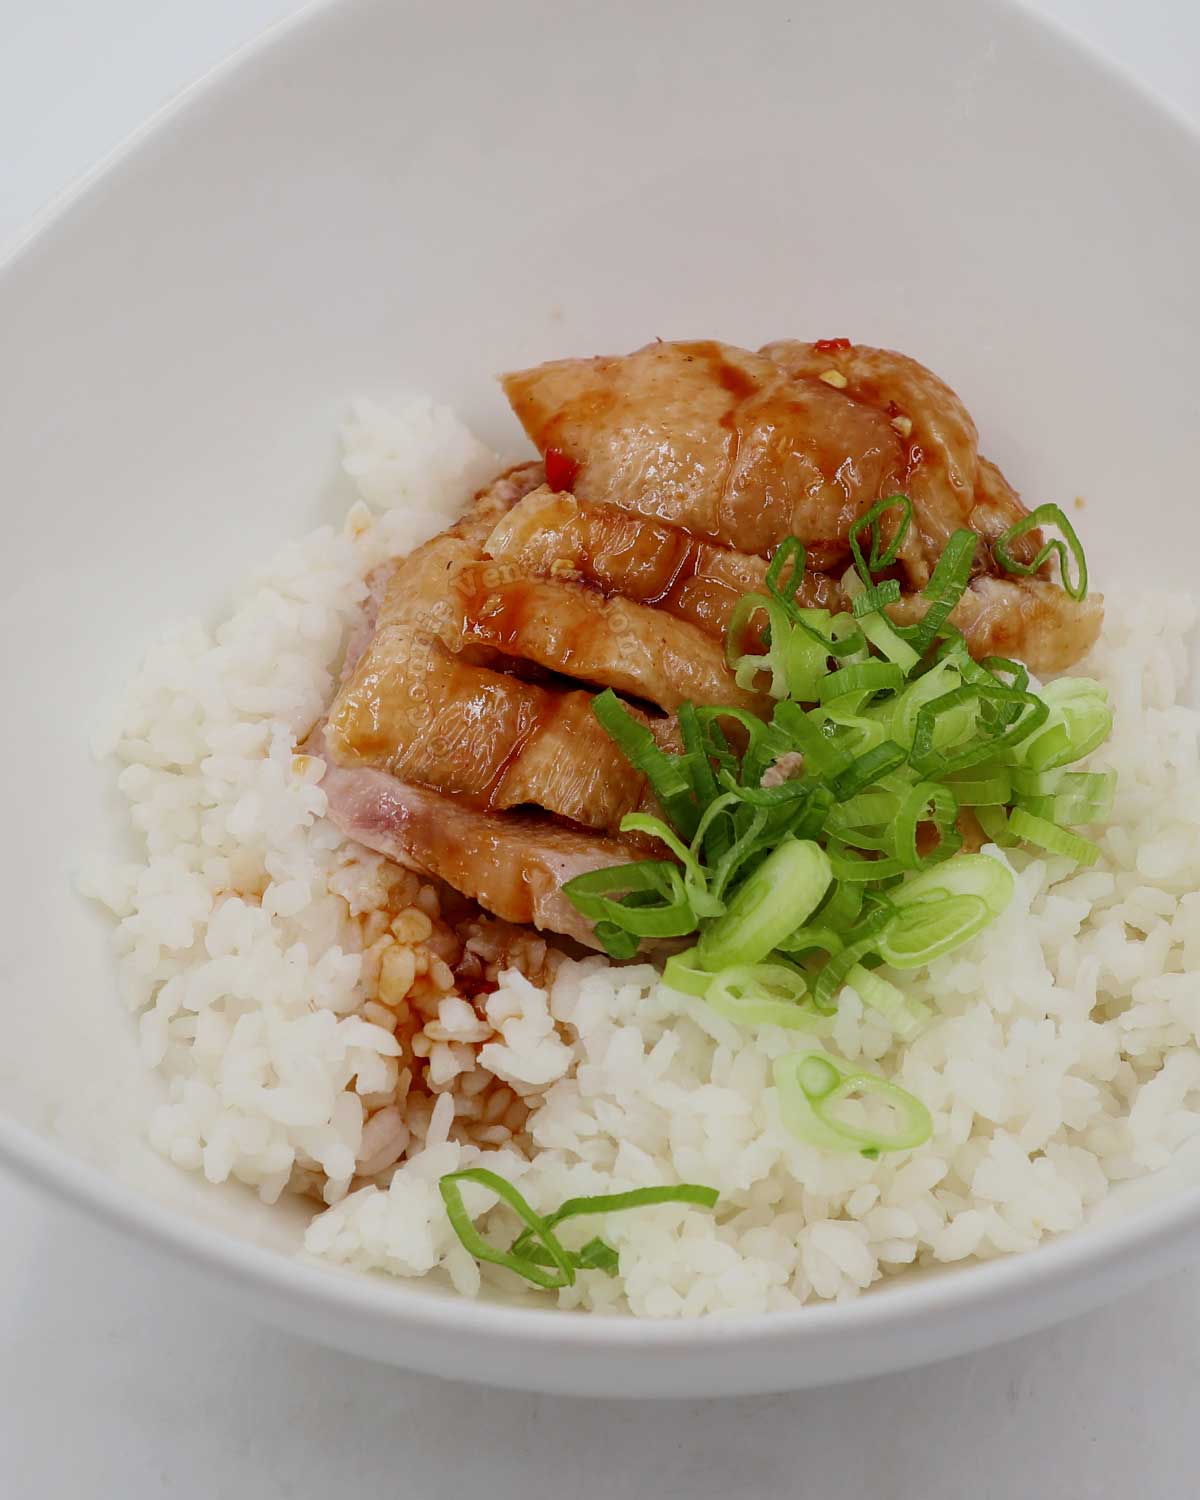 Roast duck breast fillet with sweet chili sauce over rice